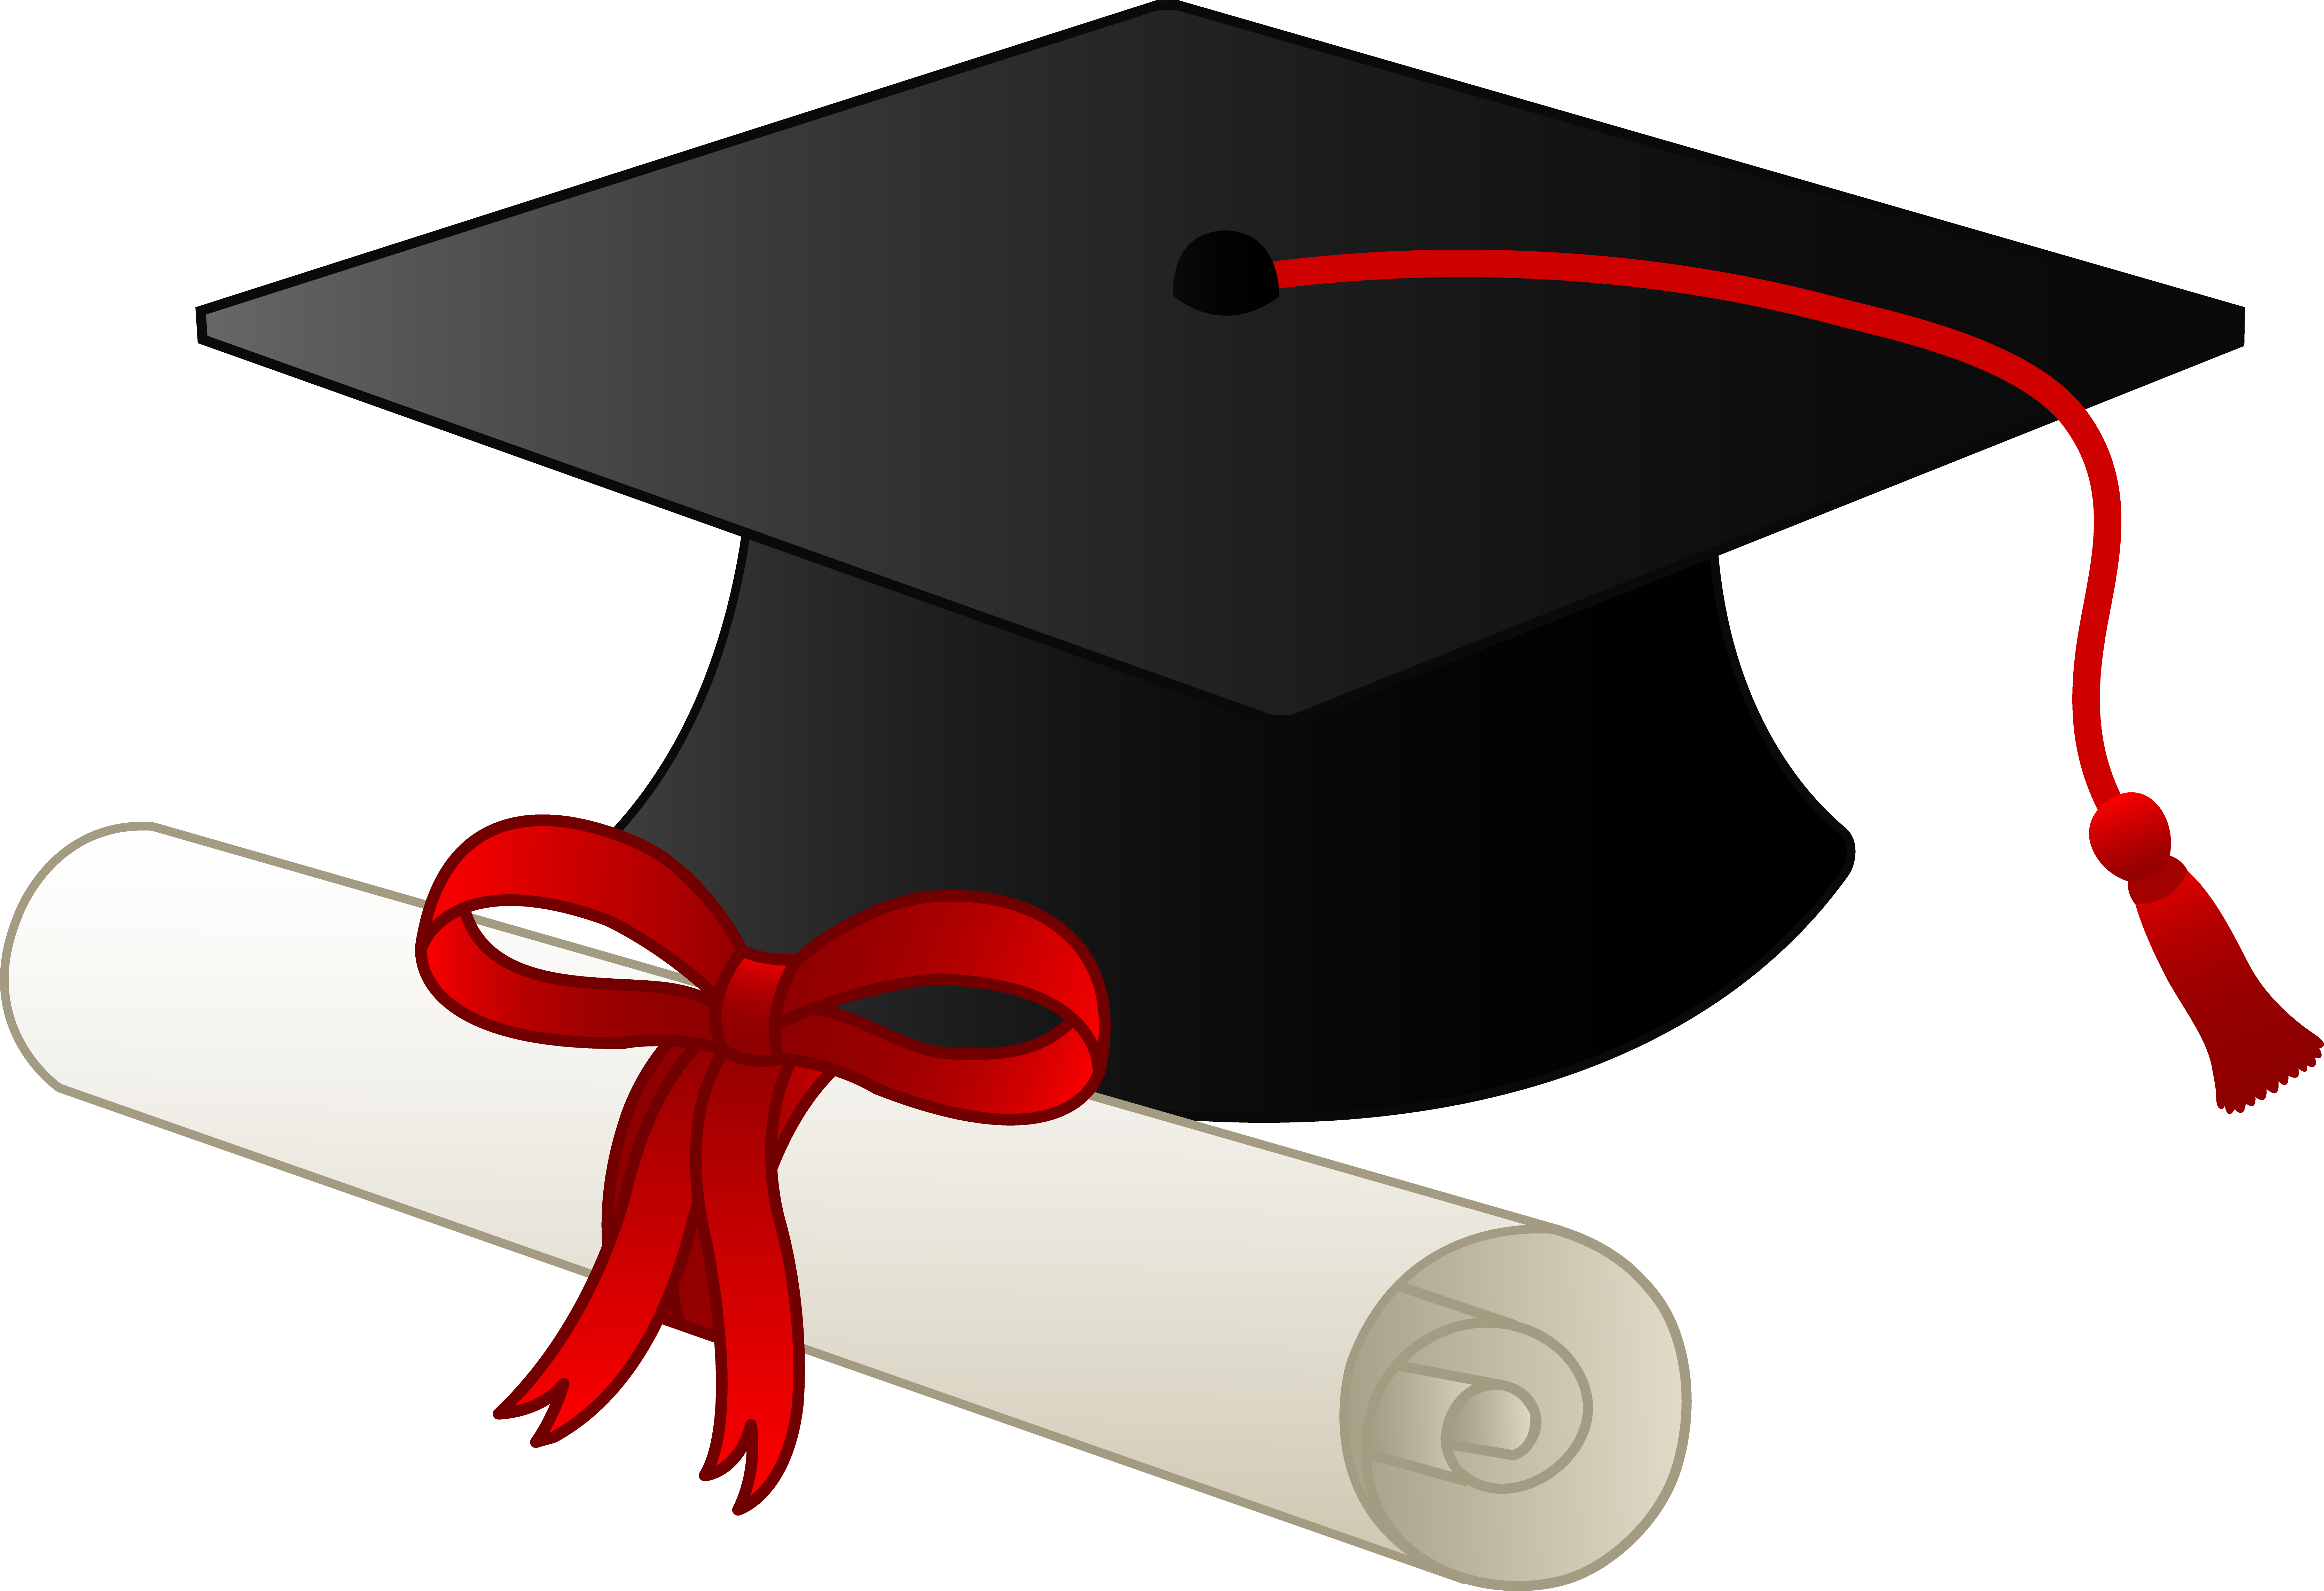 Pictures Of Caps And Gowns - Clipart library